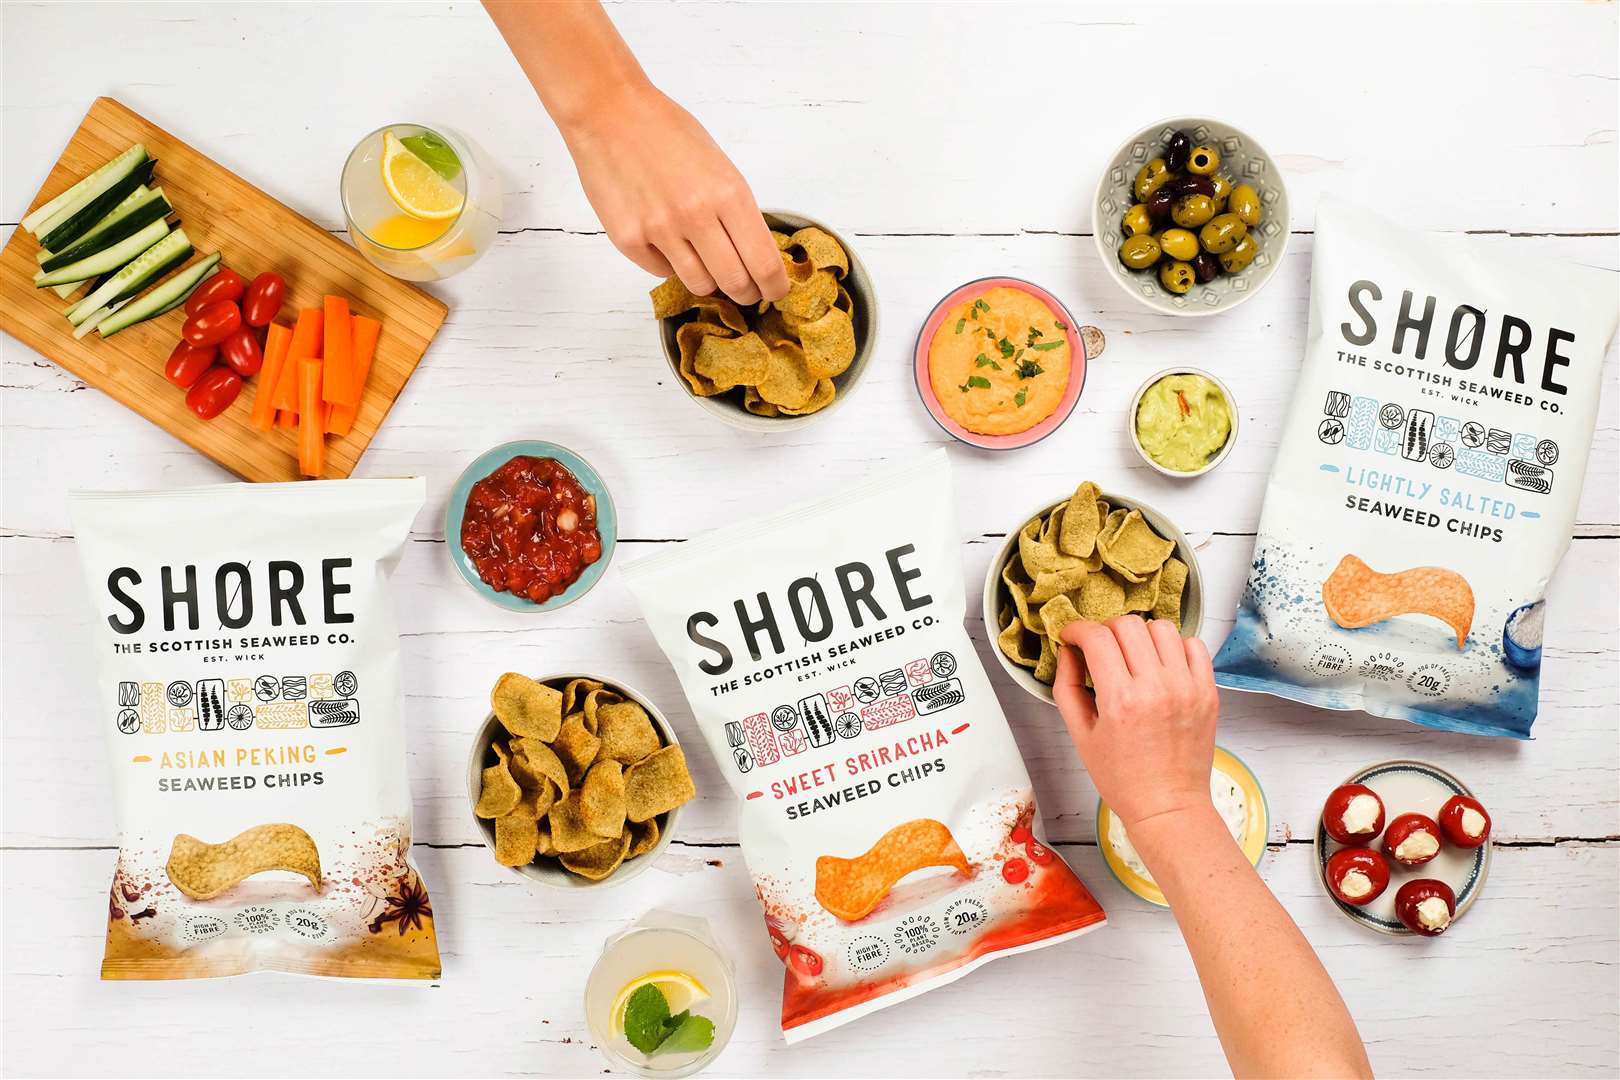 Shore Seaweed, which has a base in Wick, plans to develop its brand over the next five years